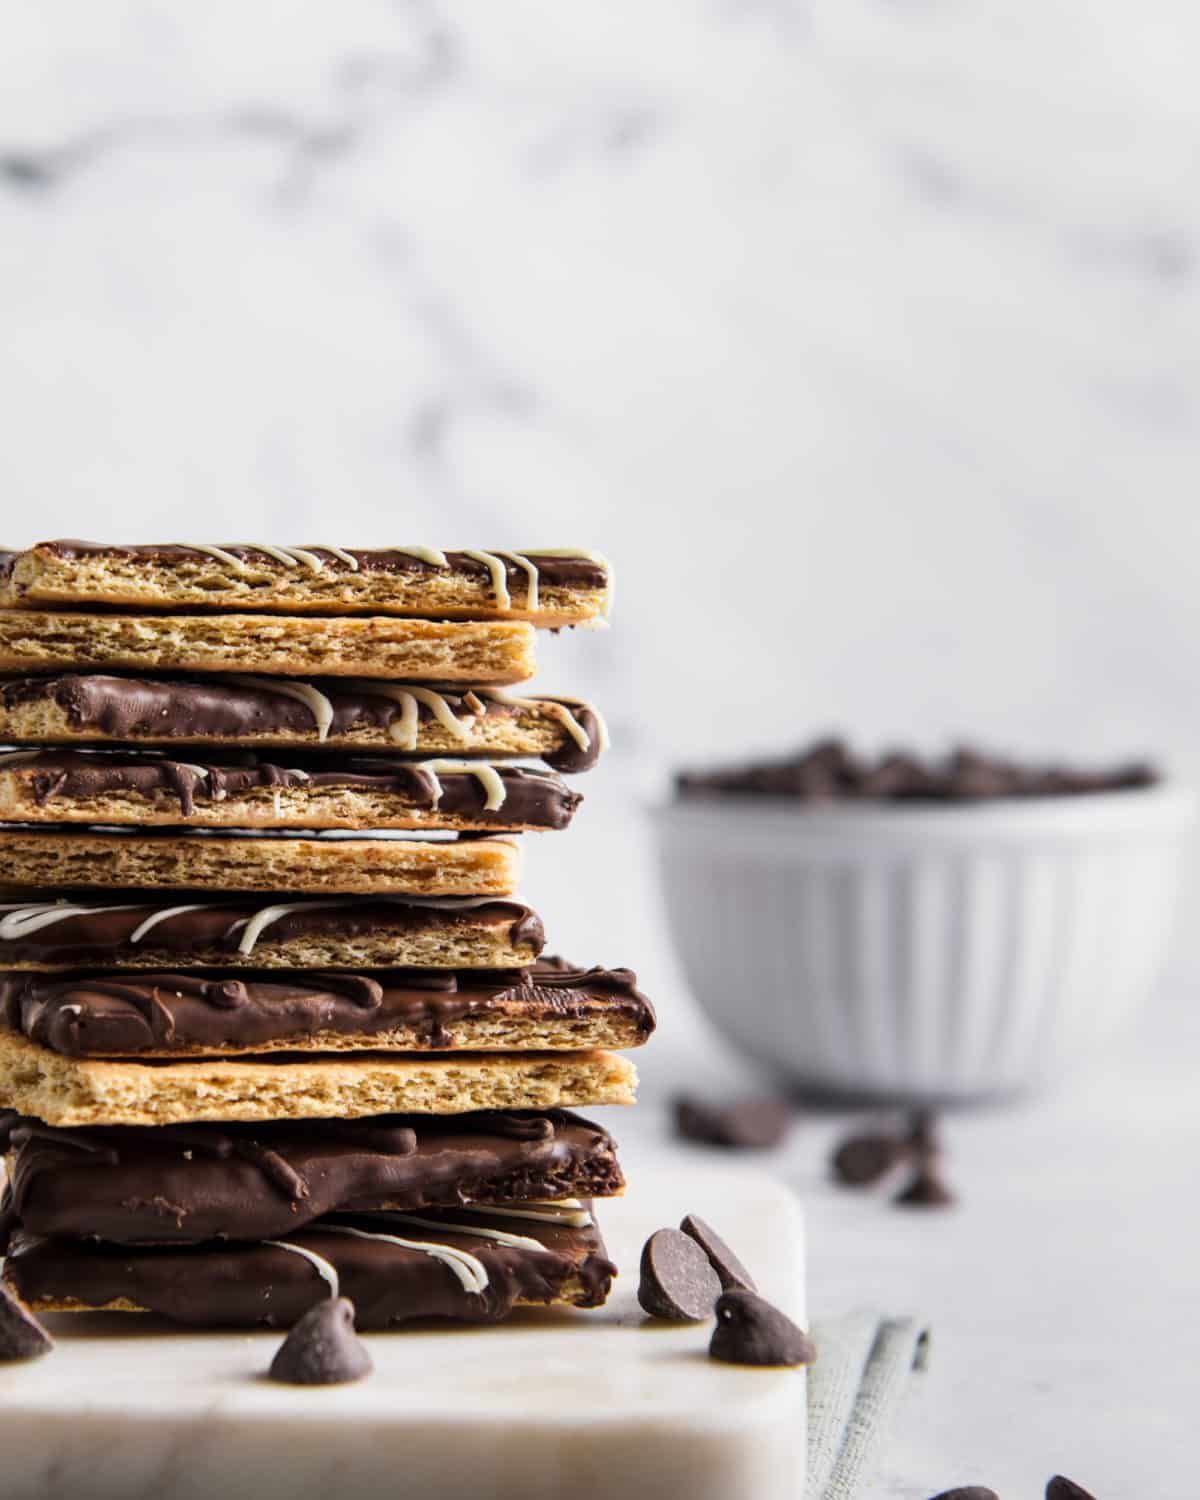 A stack of chocolate covered graham crackers on a table.